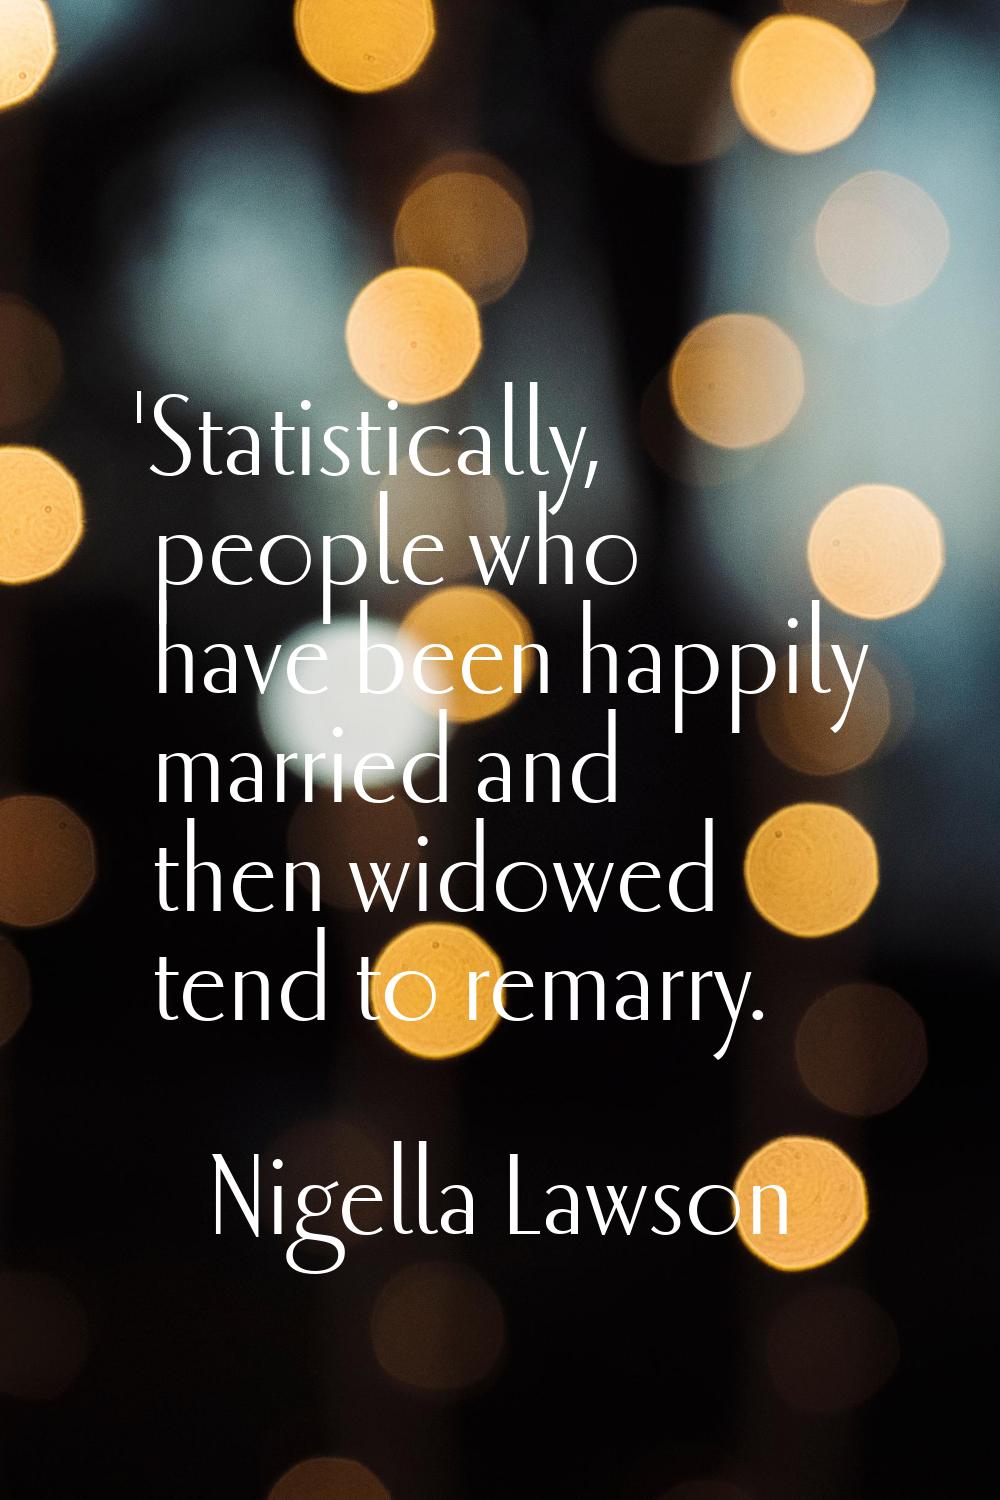 'Statistically, people who have been happily married and then widowed tend to remarry.